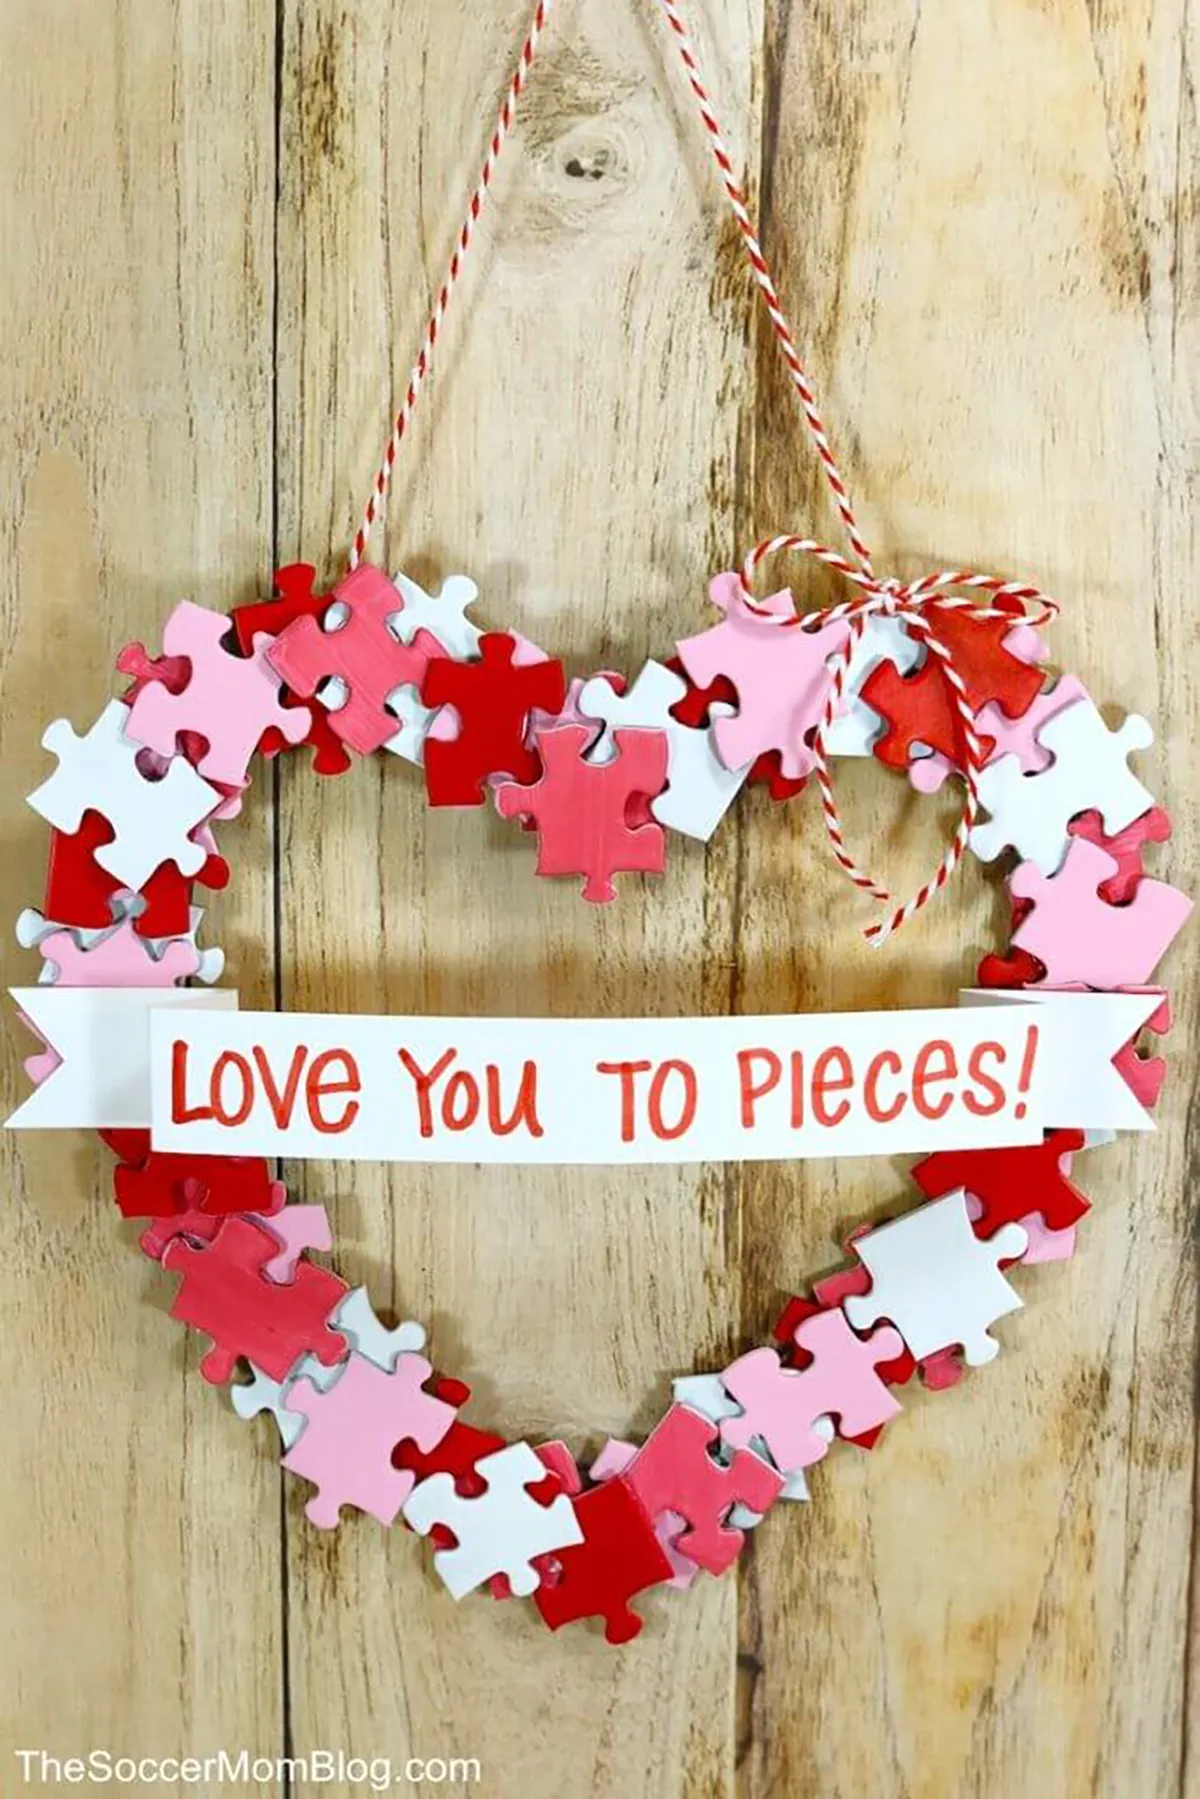 diy valentines decorations - puzzle wreath hanging against a wooden wall